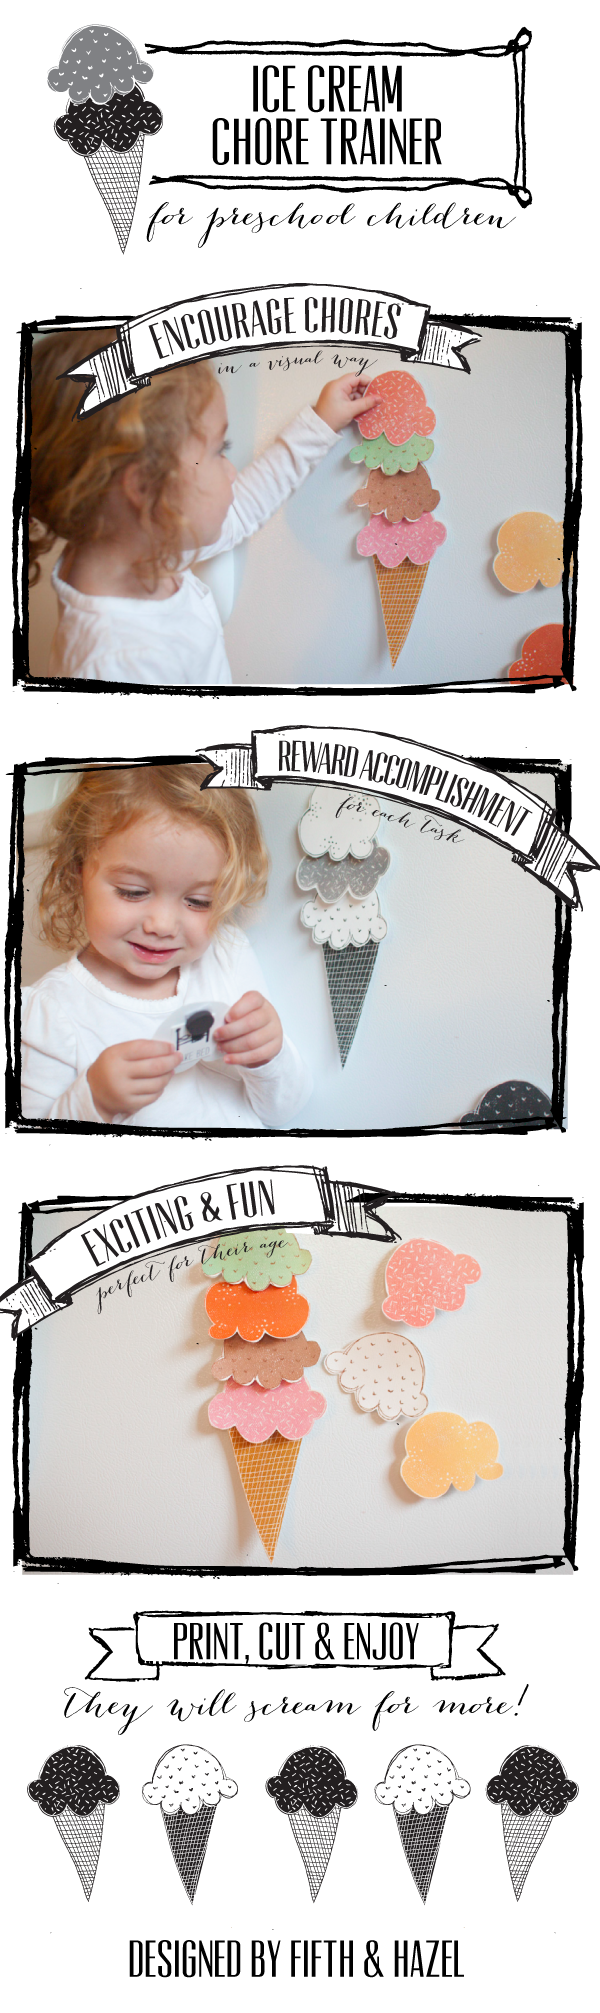 Super fun printable ice cream chore chart for the little guys :)    I think it w